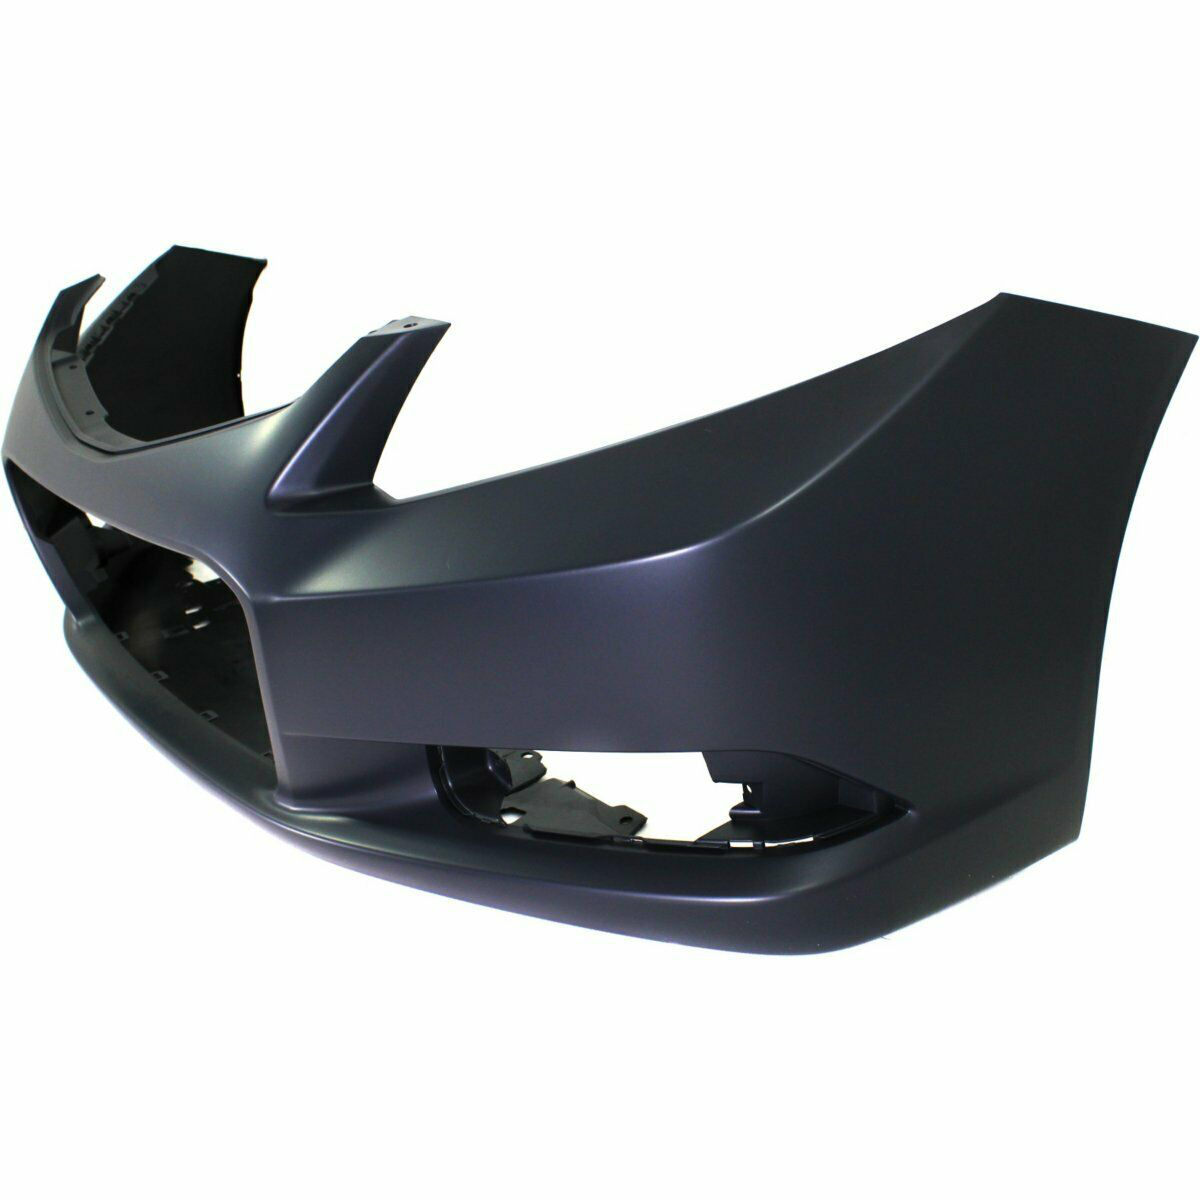 2012-2013 Honda Civic Coupe Front Bumper Painted to Match